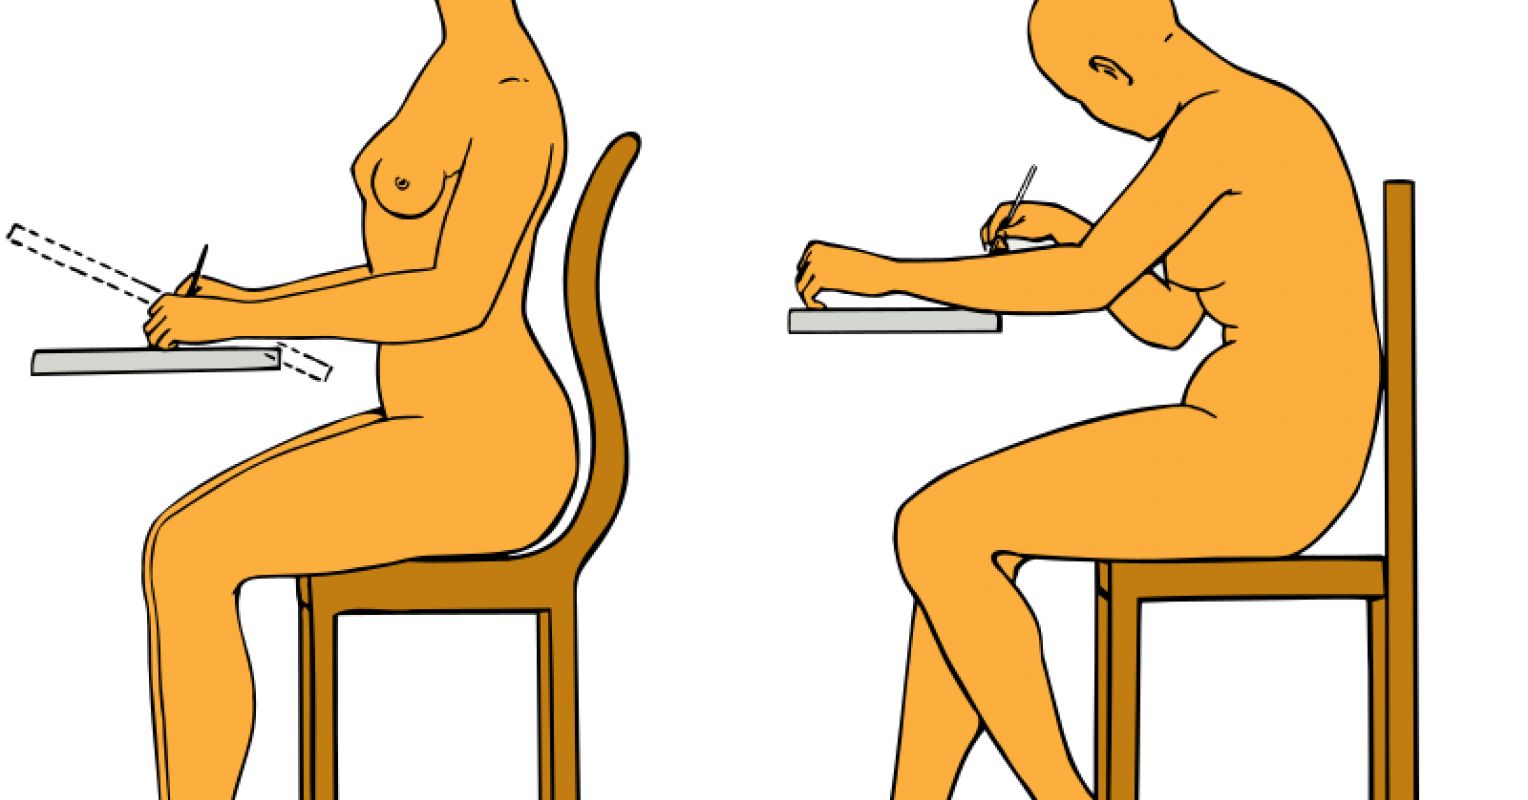 Good Posture: What It Looks Like & Its Benefits To You